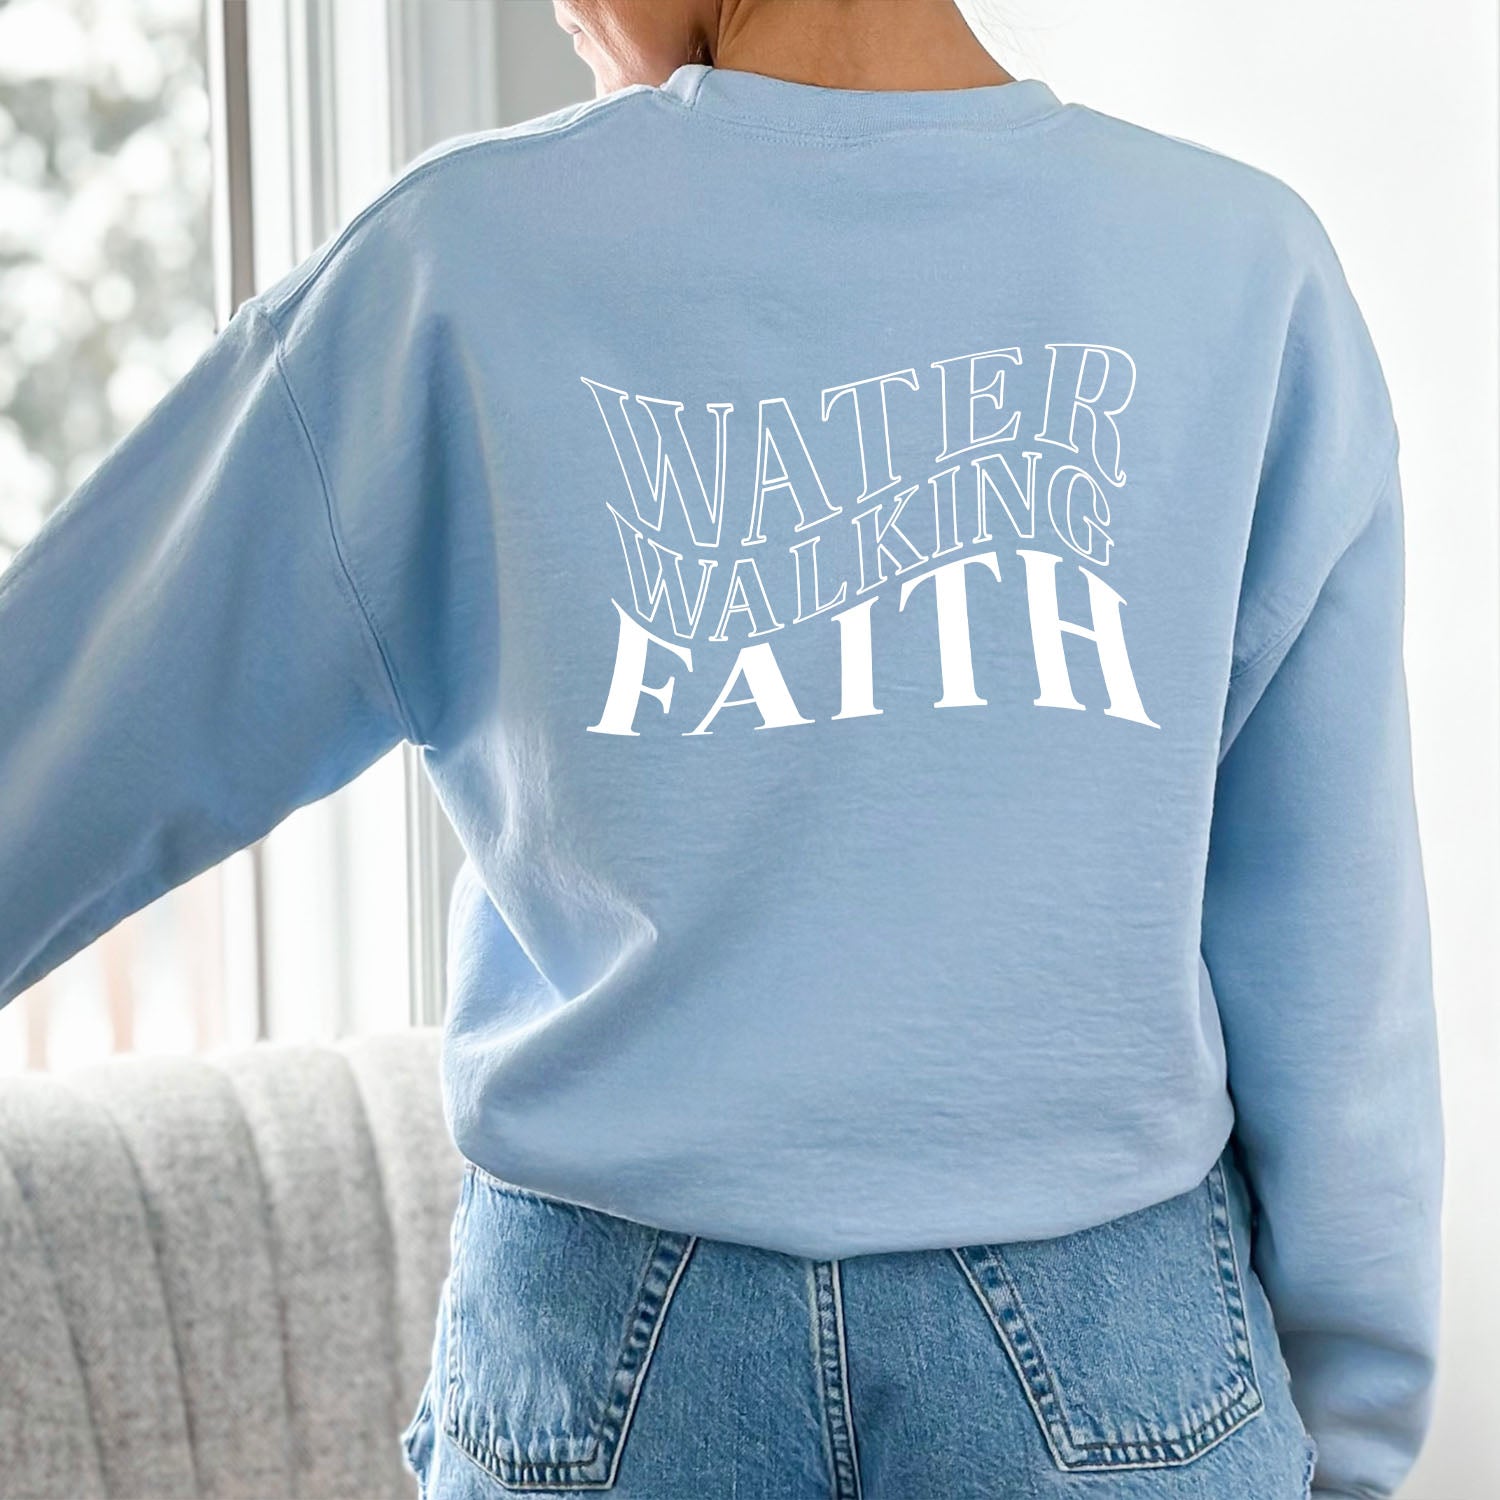 A woman wearing a Water Walking Faith Sweatshirt by Be Still and Know is seen standing in front of a window.